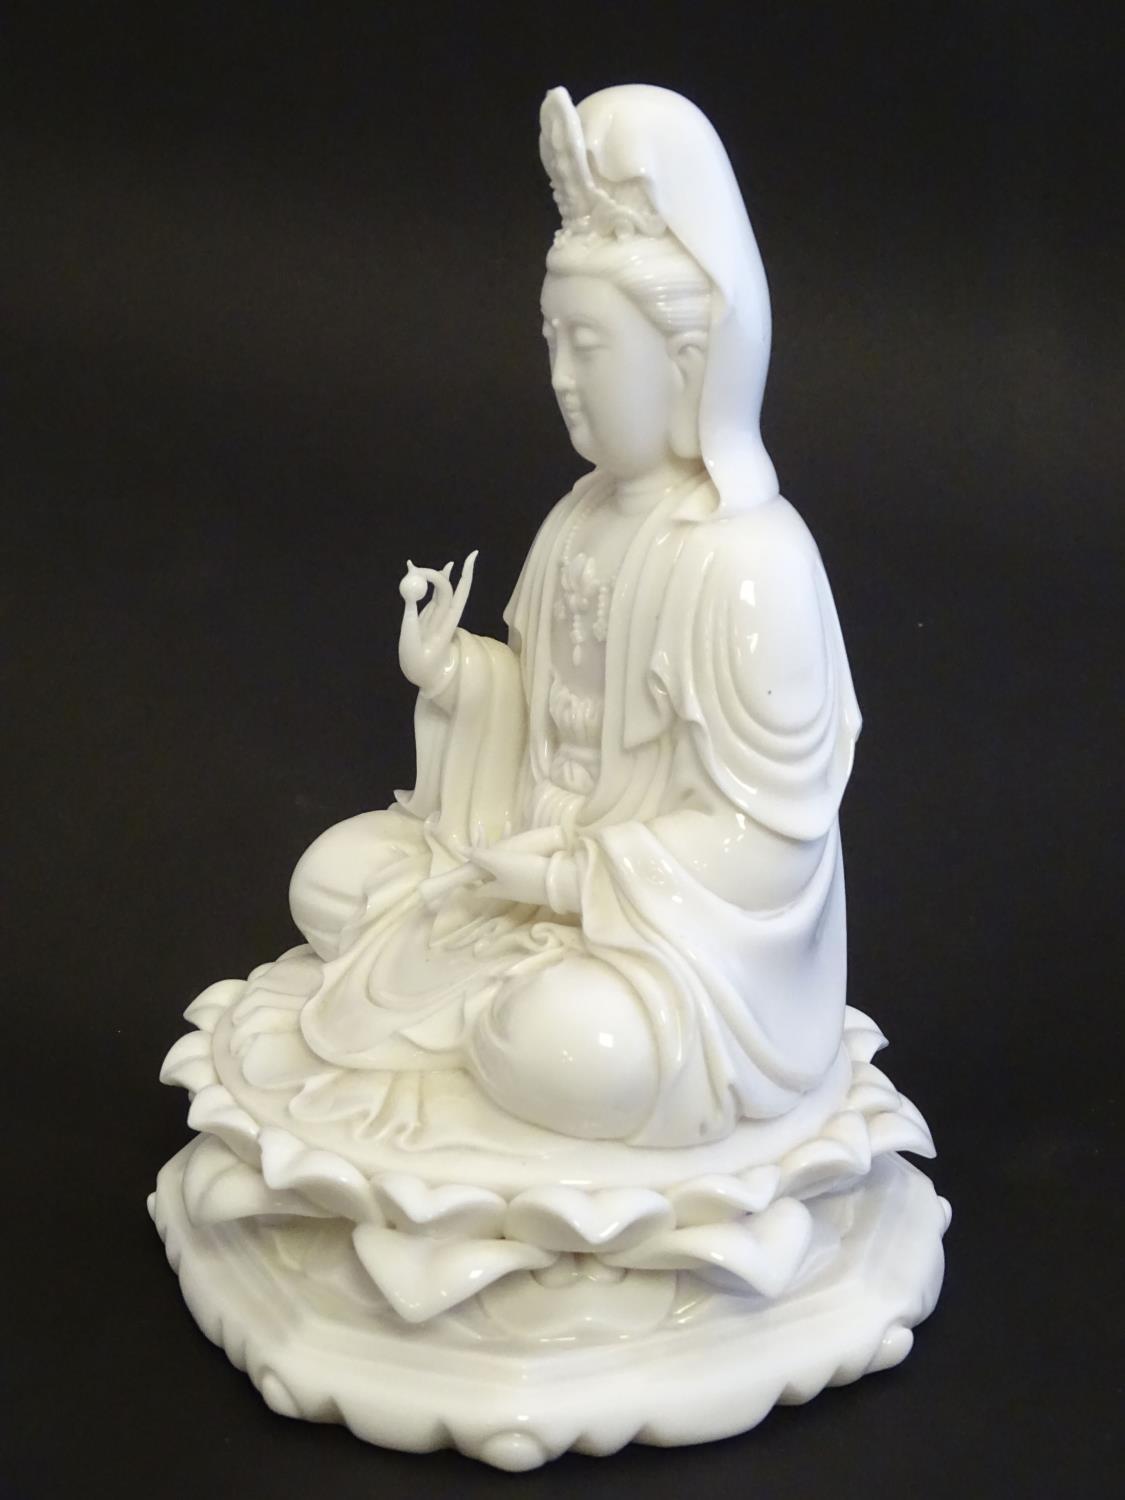 A Chinese blanc de chine figure depicting Guanyin seated on a lotus flower base. Approx. 7 1/2" high - Image 12 of 16